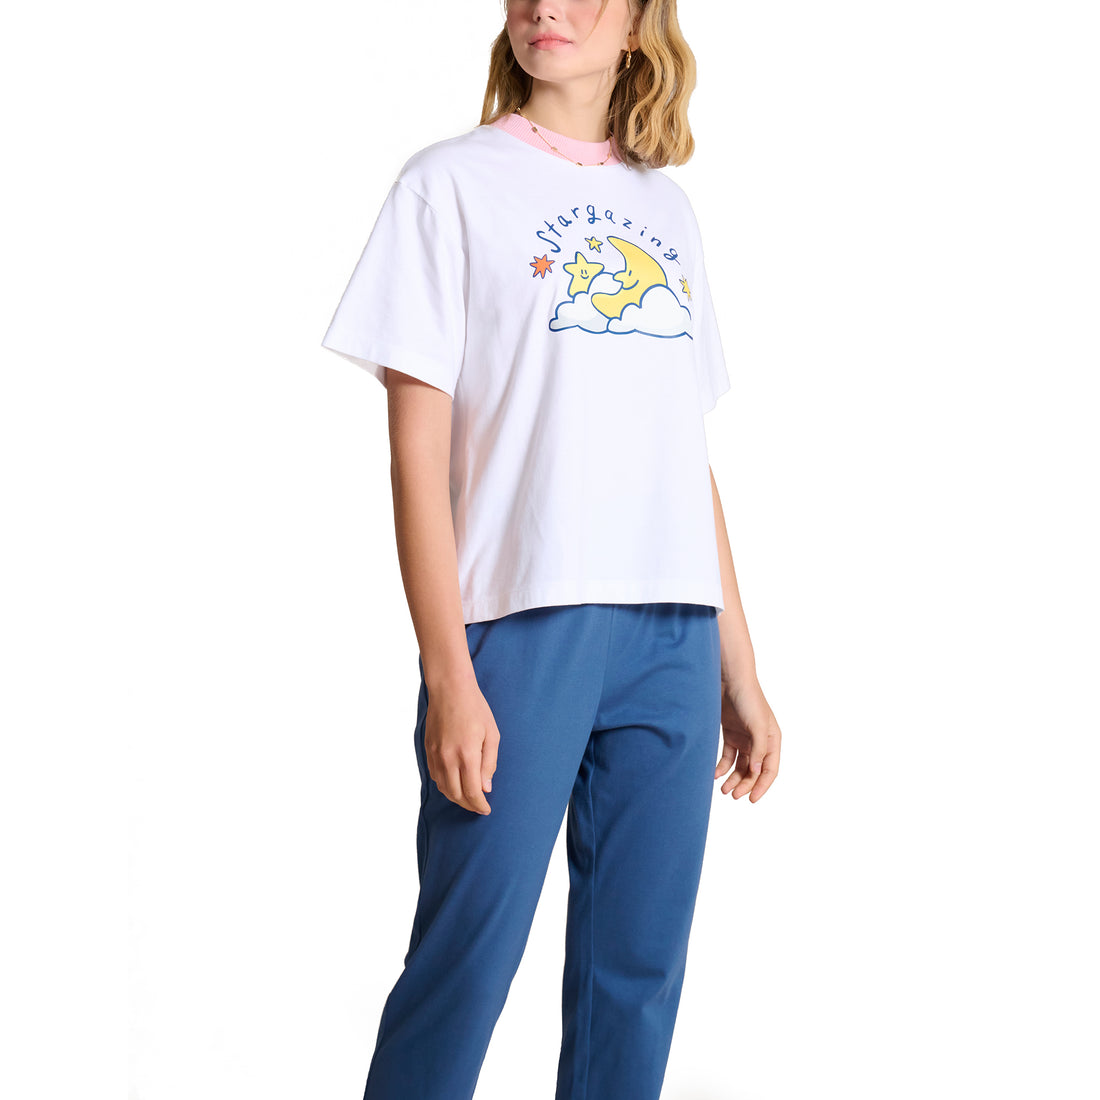 Wacoal x Fluffy Omelet All-Day Comfy Stargazing Short Sleeve T